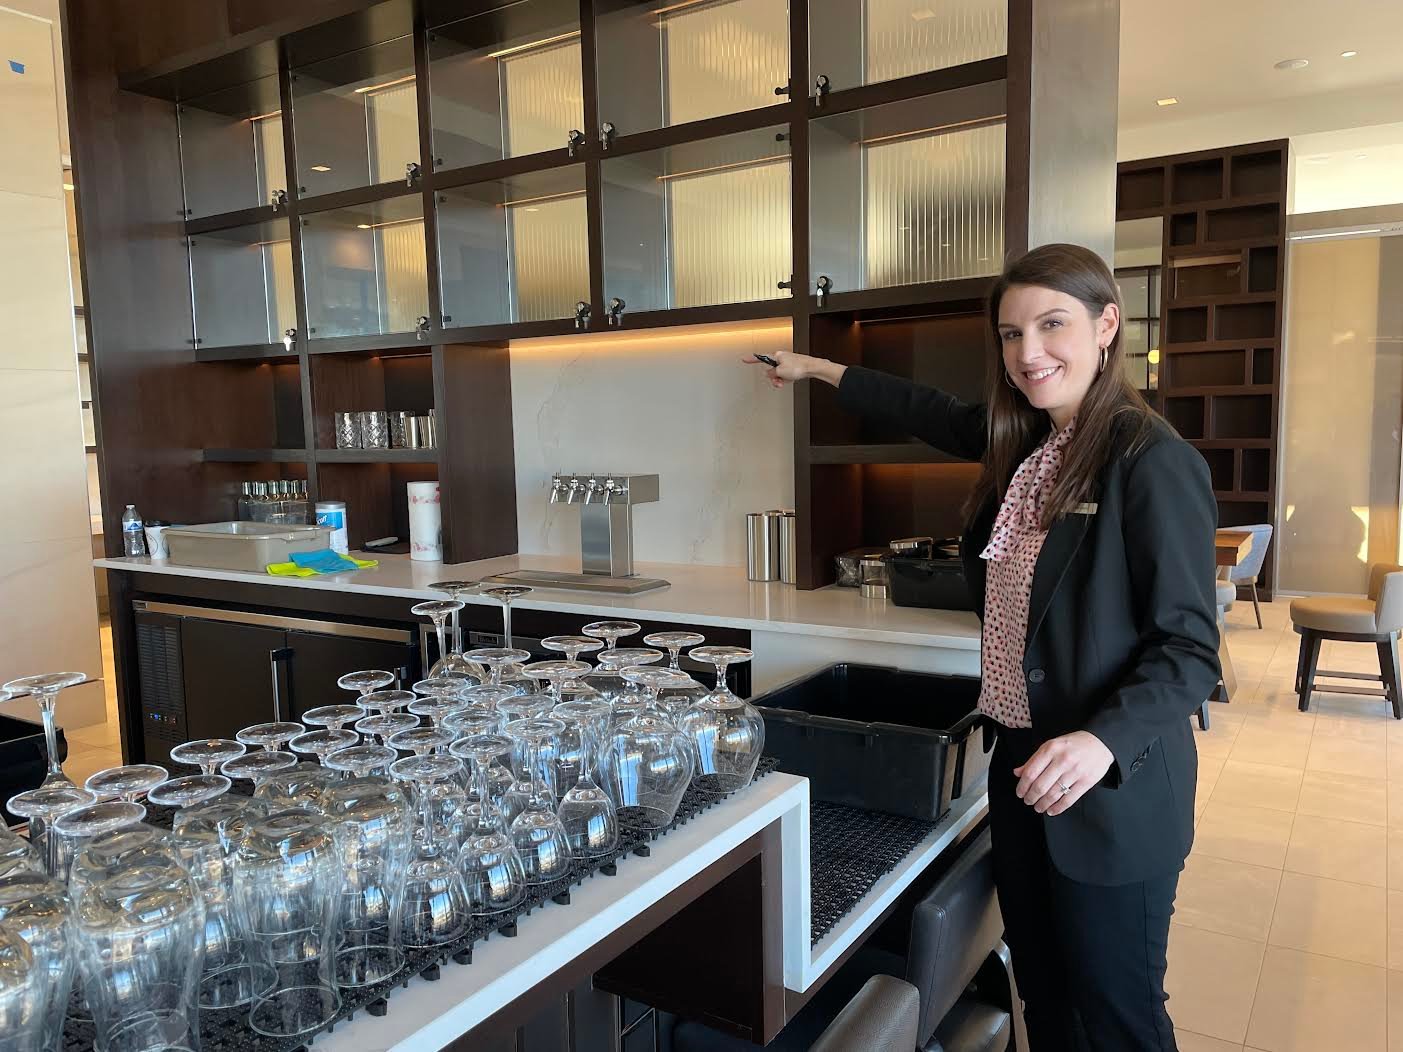 Amber Davis, director of sales, shows off the bar during a tour for local officials.